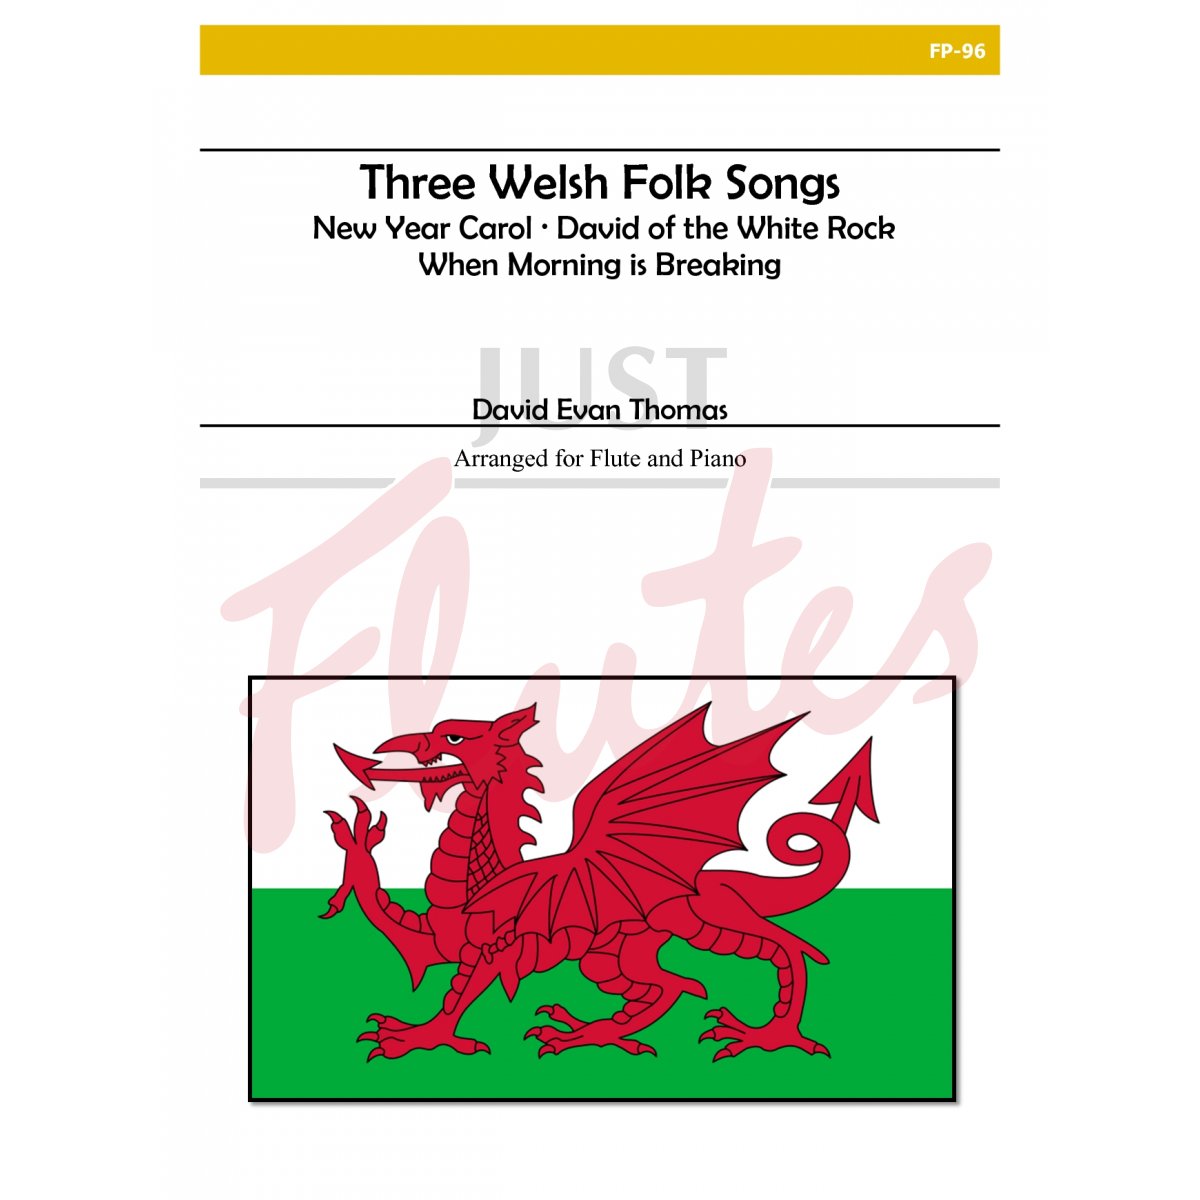 Three Welsh Folk Songs for Flute and Piano